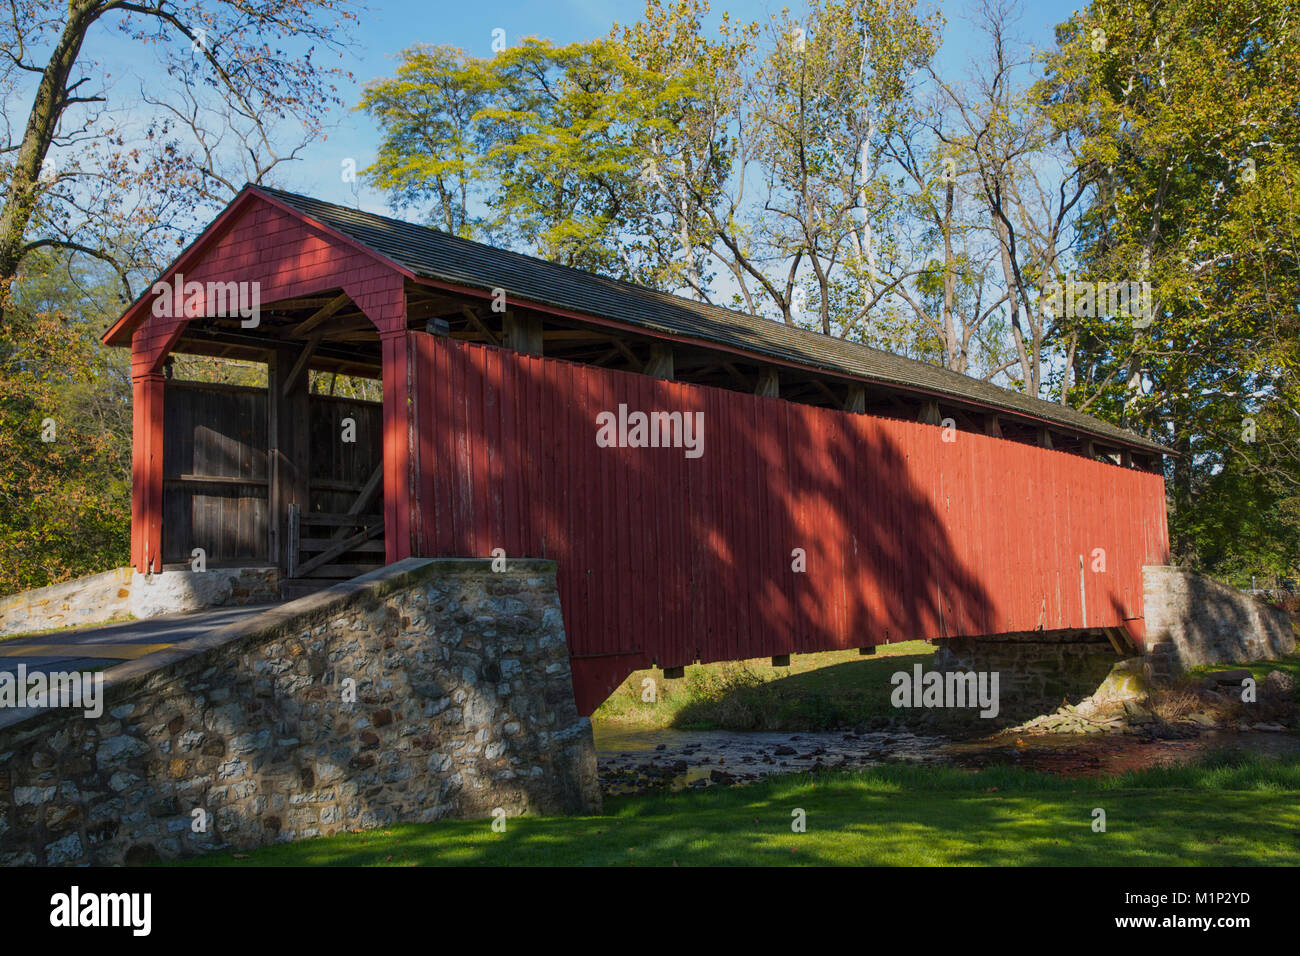 Pool Forge Covered Bridge, built in 1859, Lancaster County, Pennsylvania, United States of America, North America Stock Photo